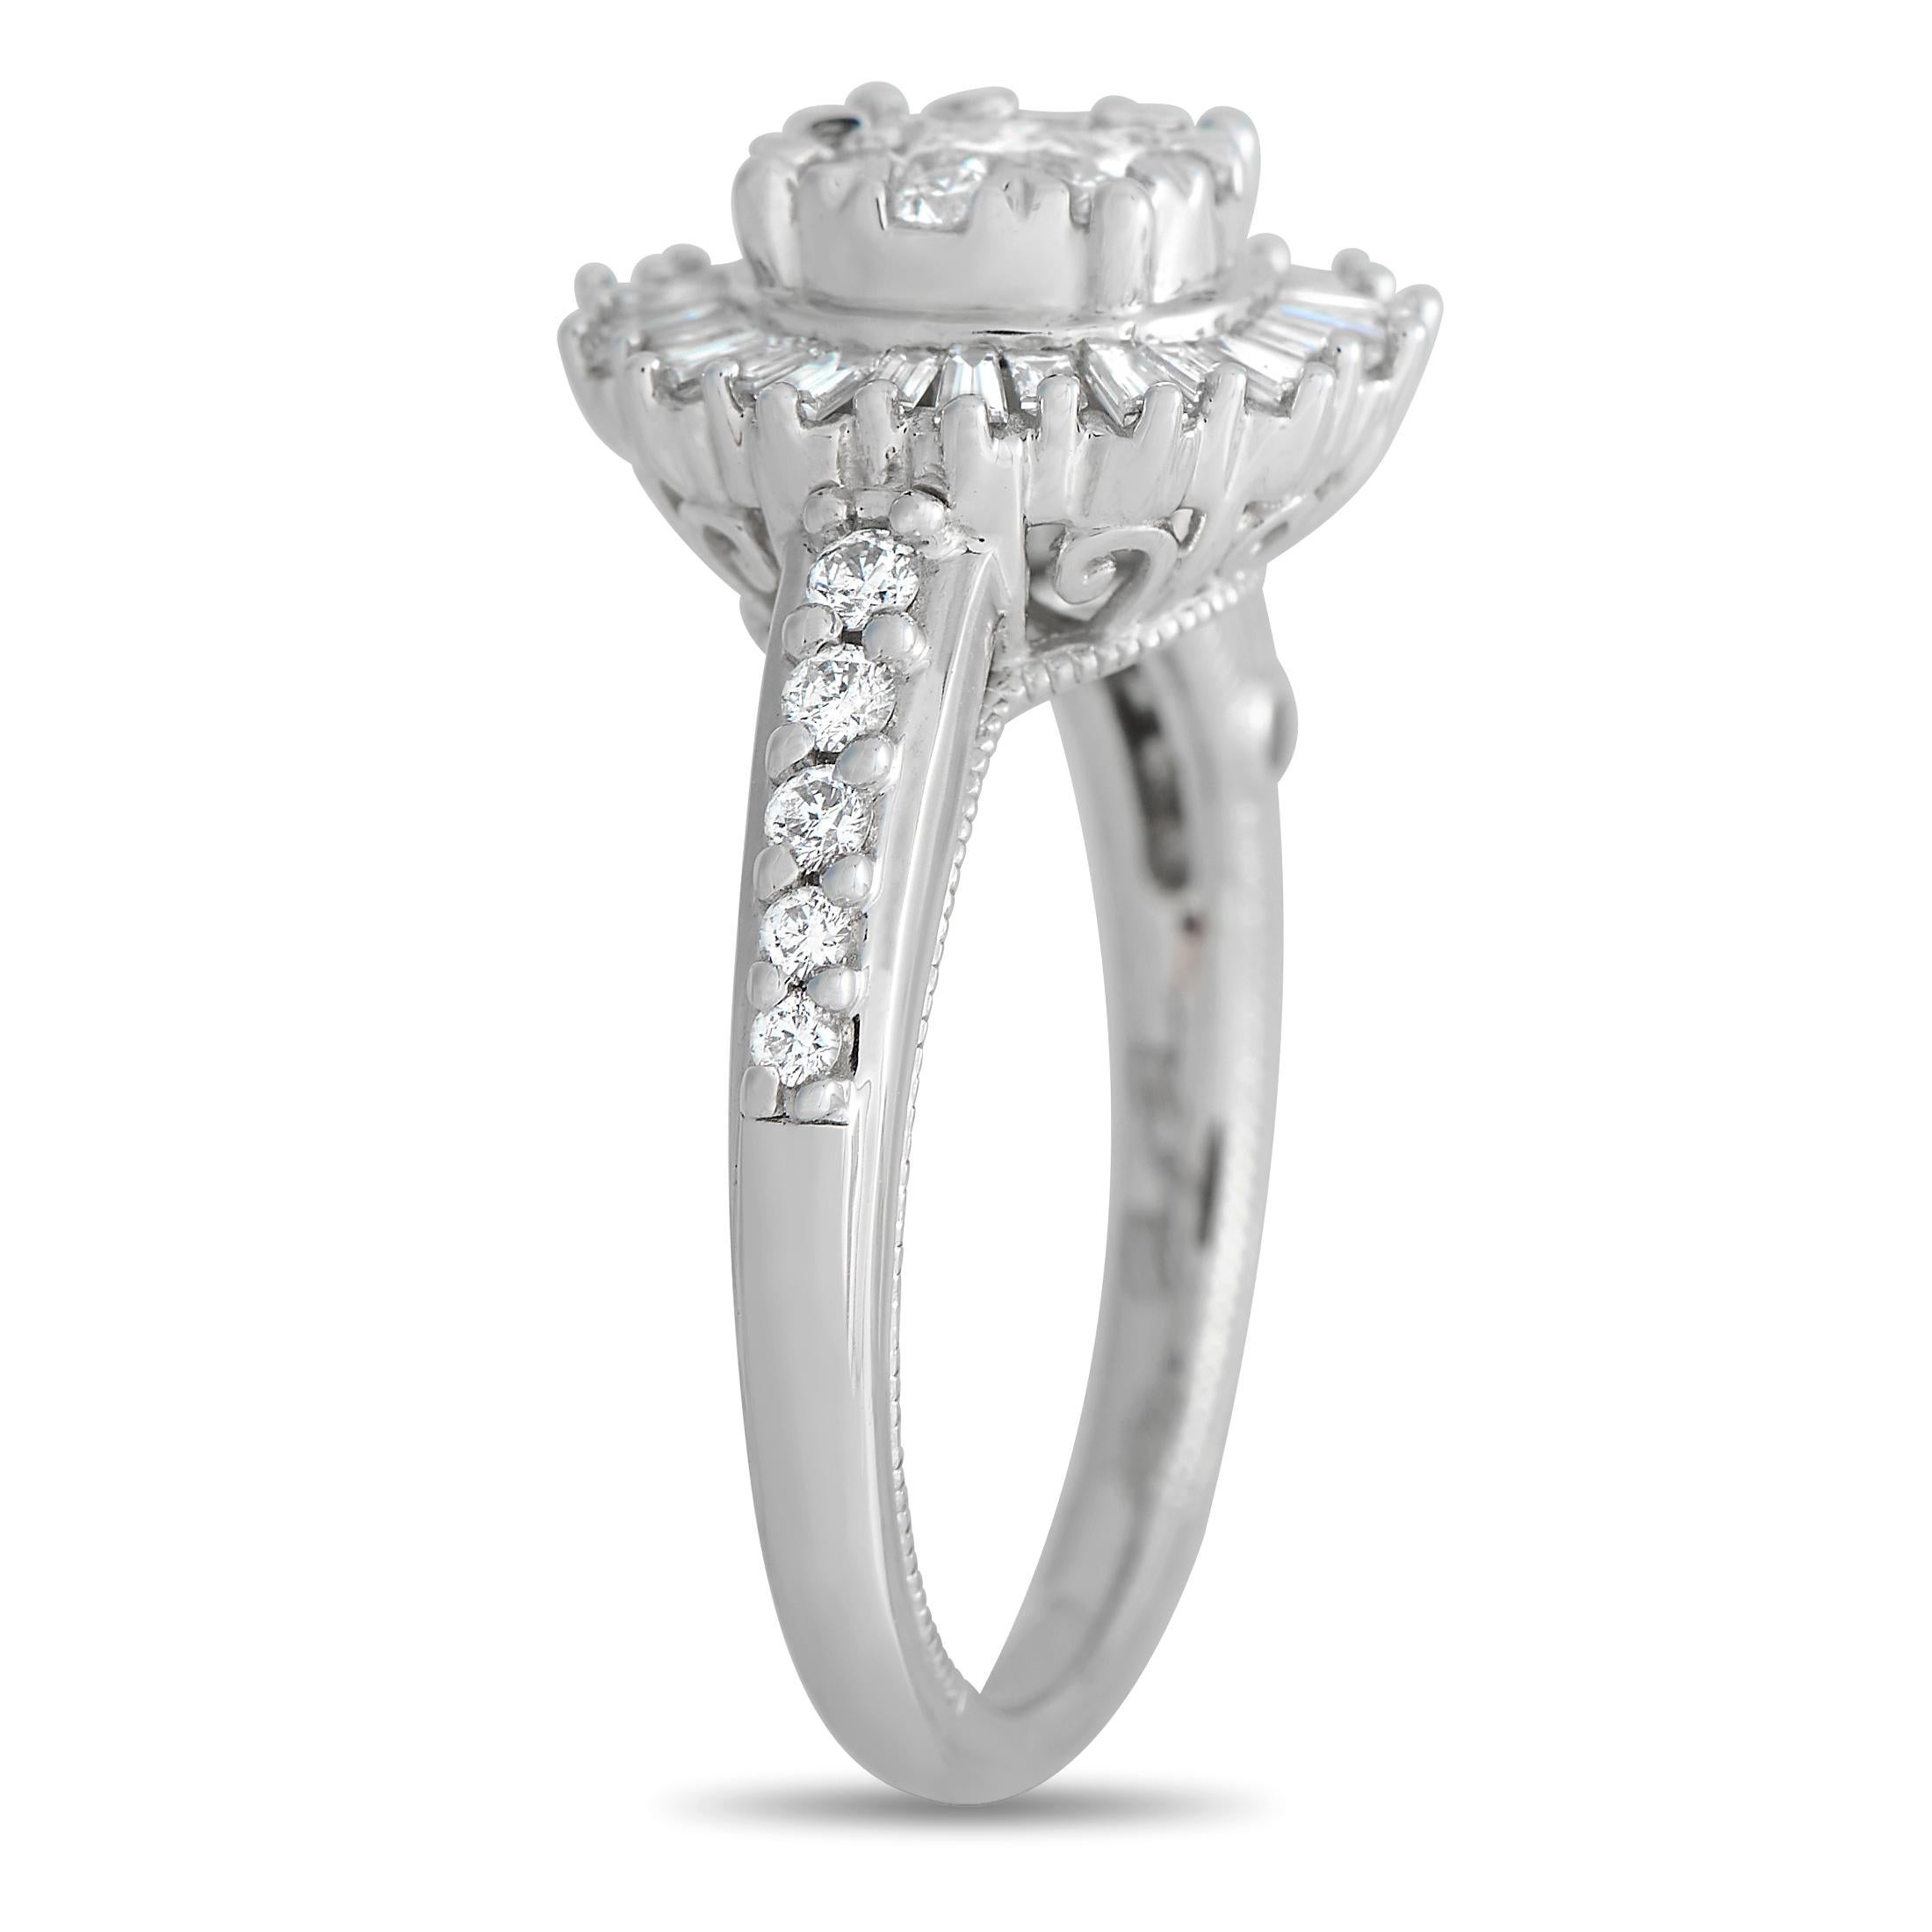 This exceptional 14K White Gold ring will continually command attention. The sophisticated setting comes to life thanks to inset diamonds that together possess a total weight of 1.0 carats. It features a 2mm wide band and a 8mm top height, meaning